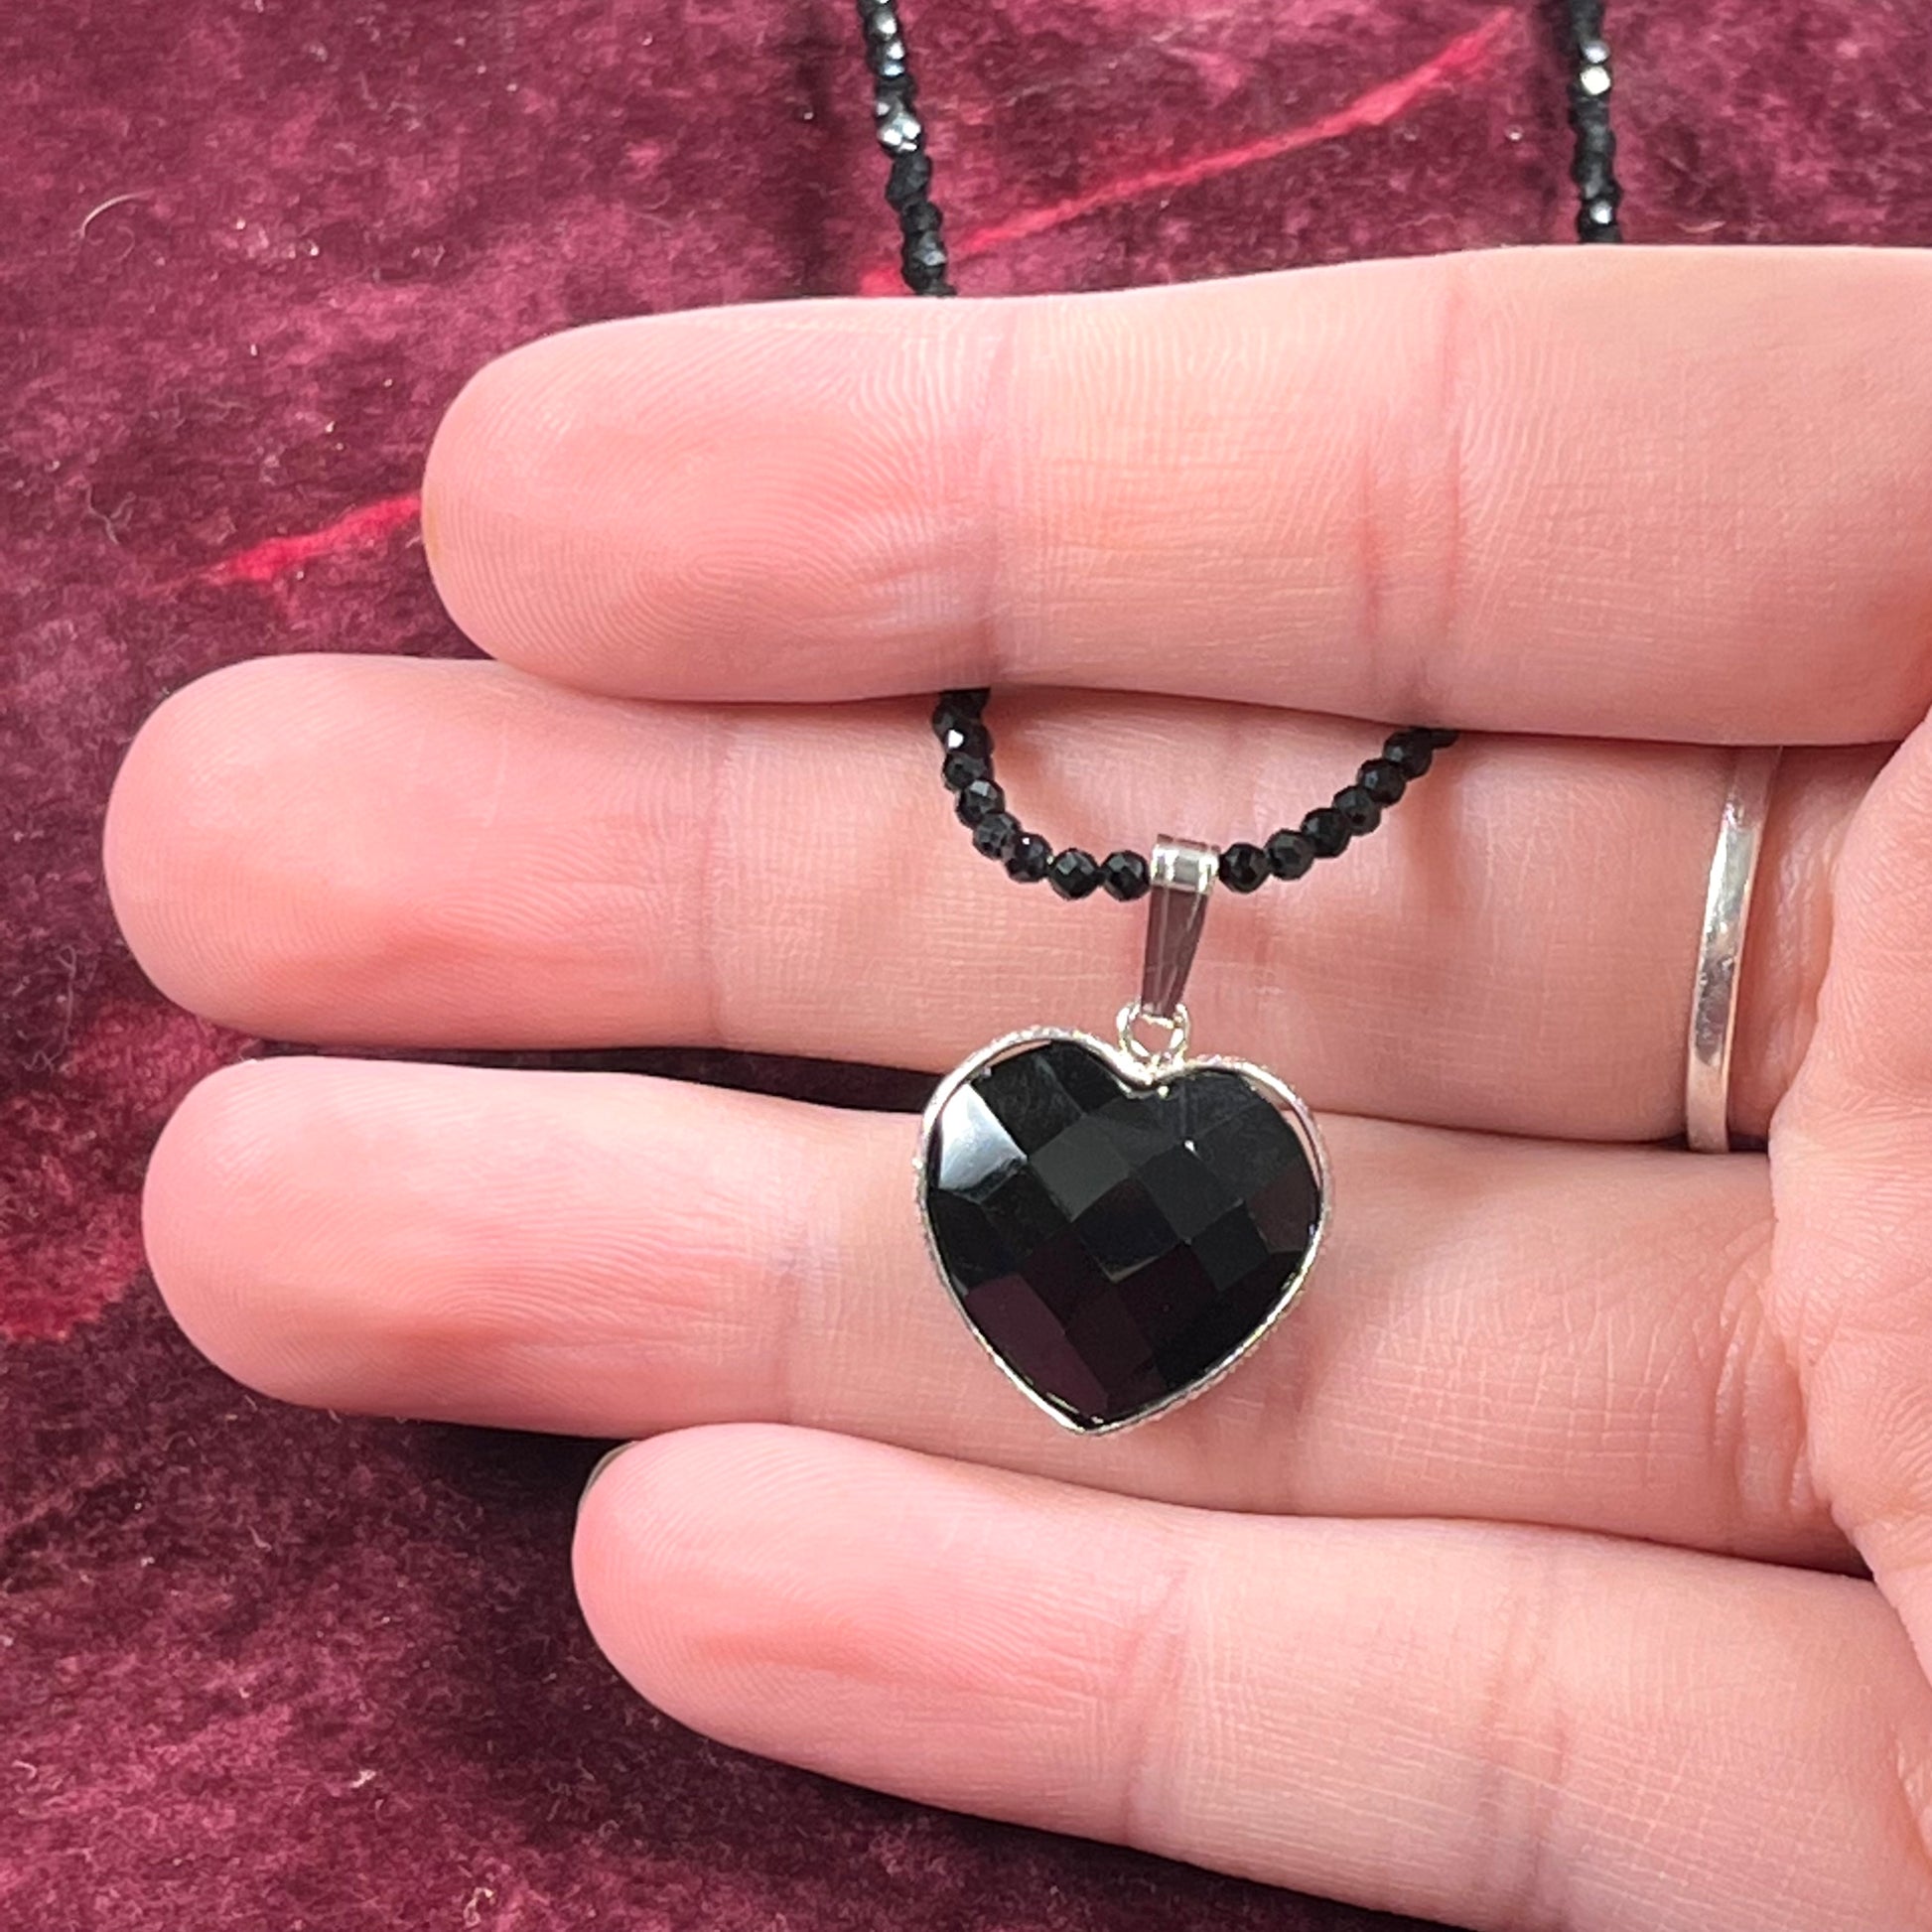 A silver heart shape black stone necklace.  The heart is a faceted cut black spinel, and the pendant is on faceted black spinel beads.